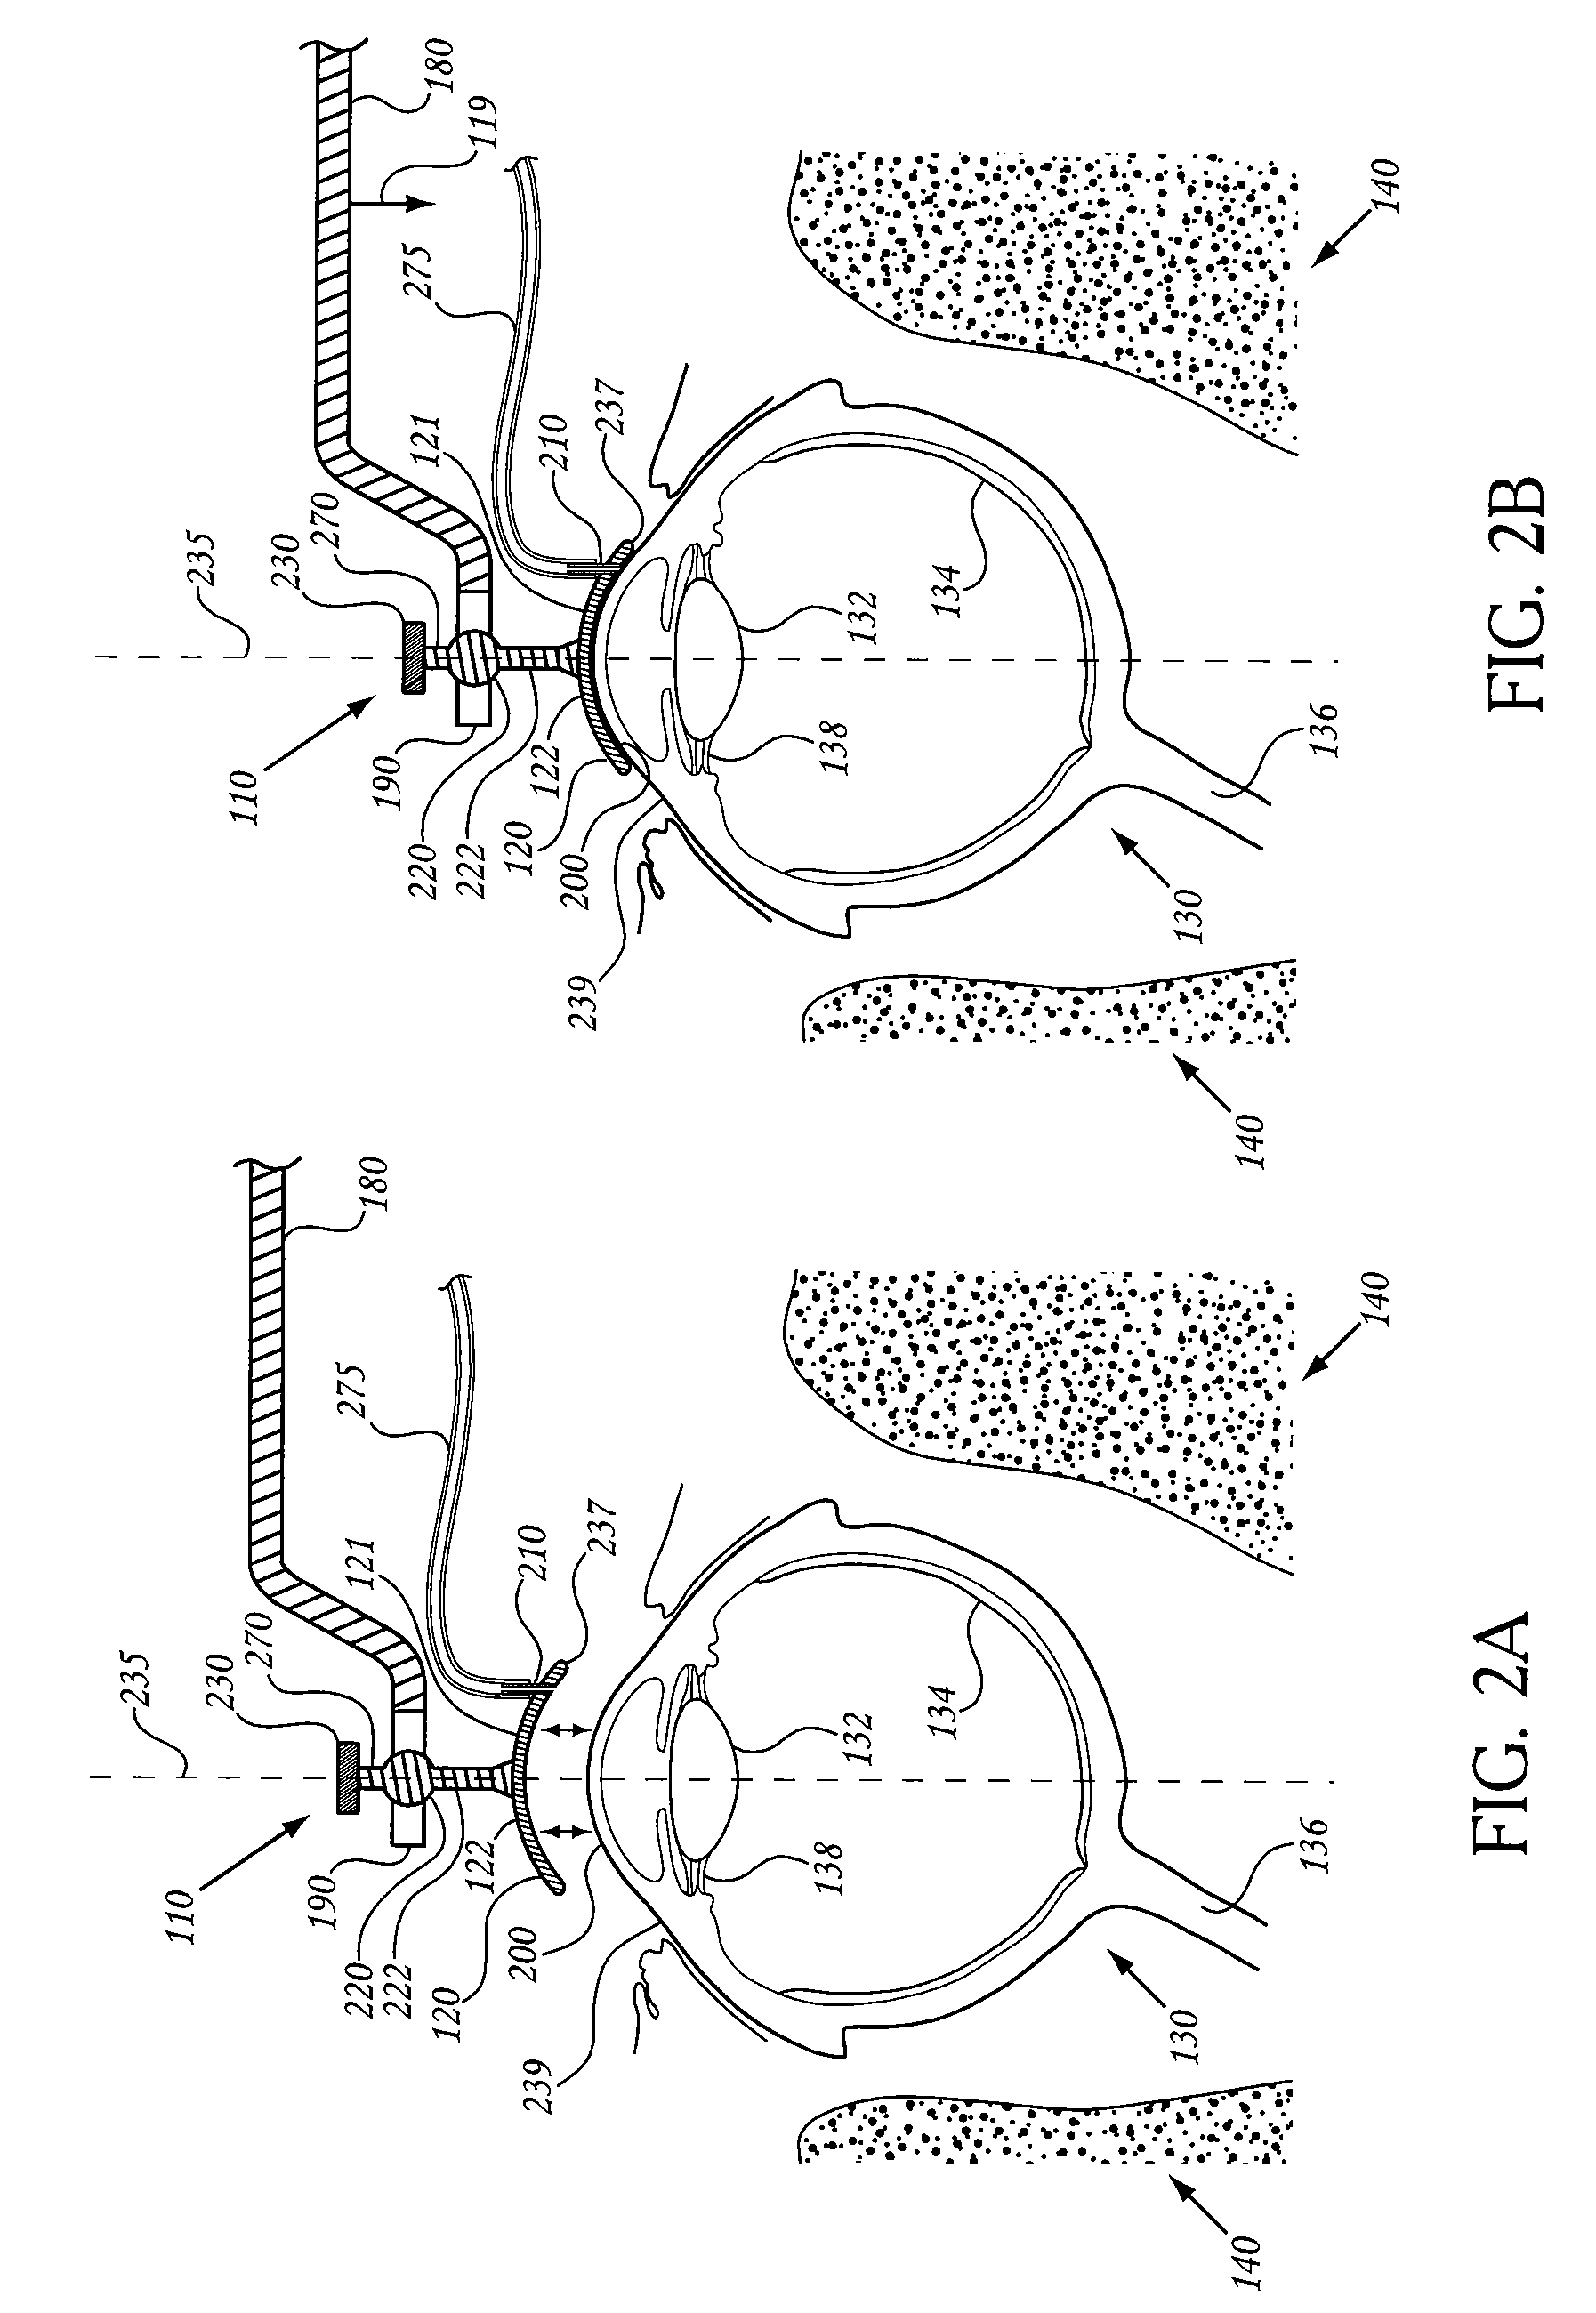 Device and assembly for positioning and stabilizing an eye